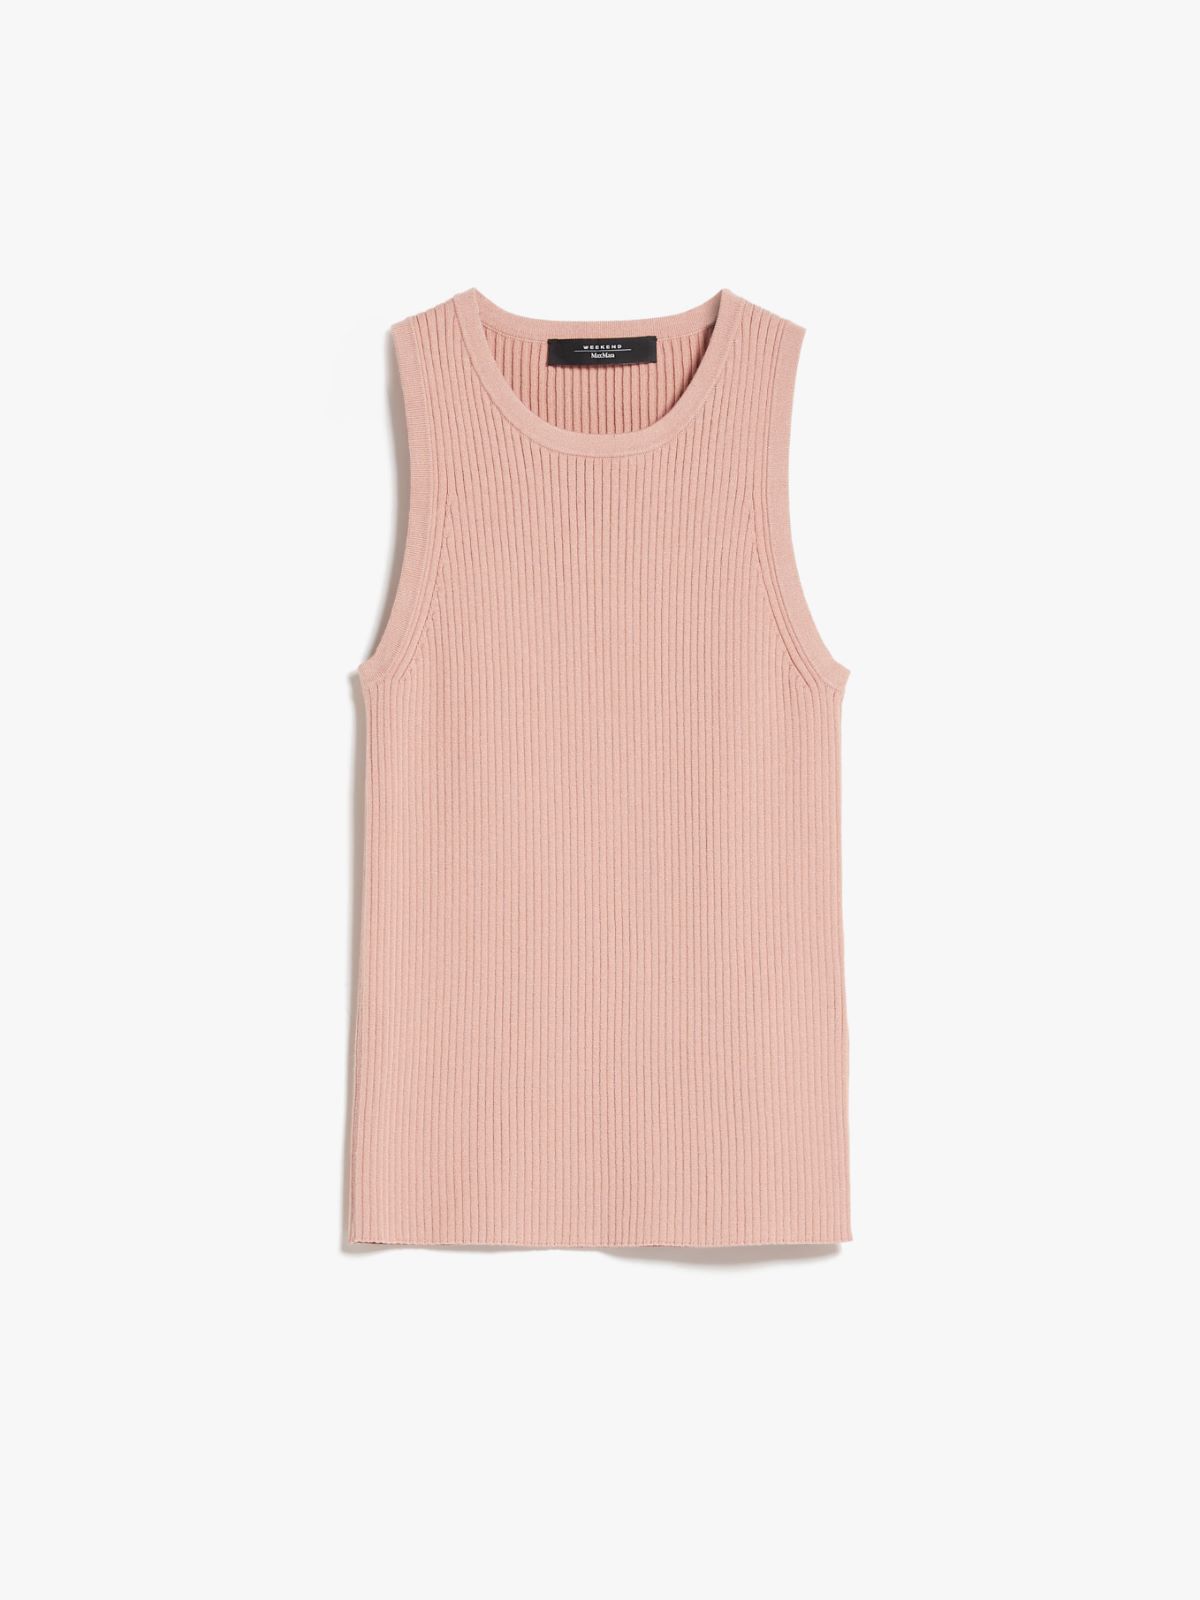 Ribbed top in stretch knit - PEACH - Weekend Max Mara - 6